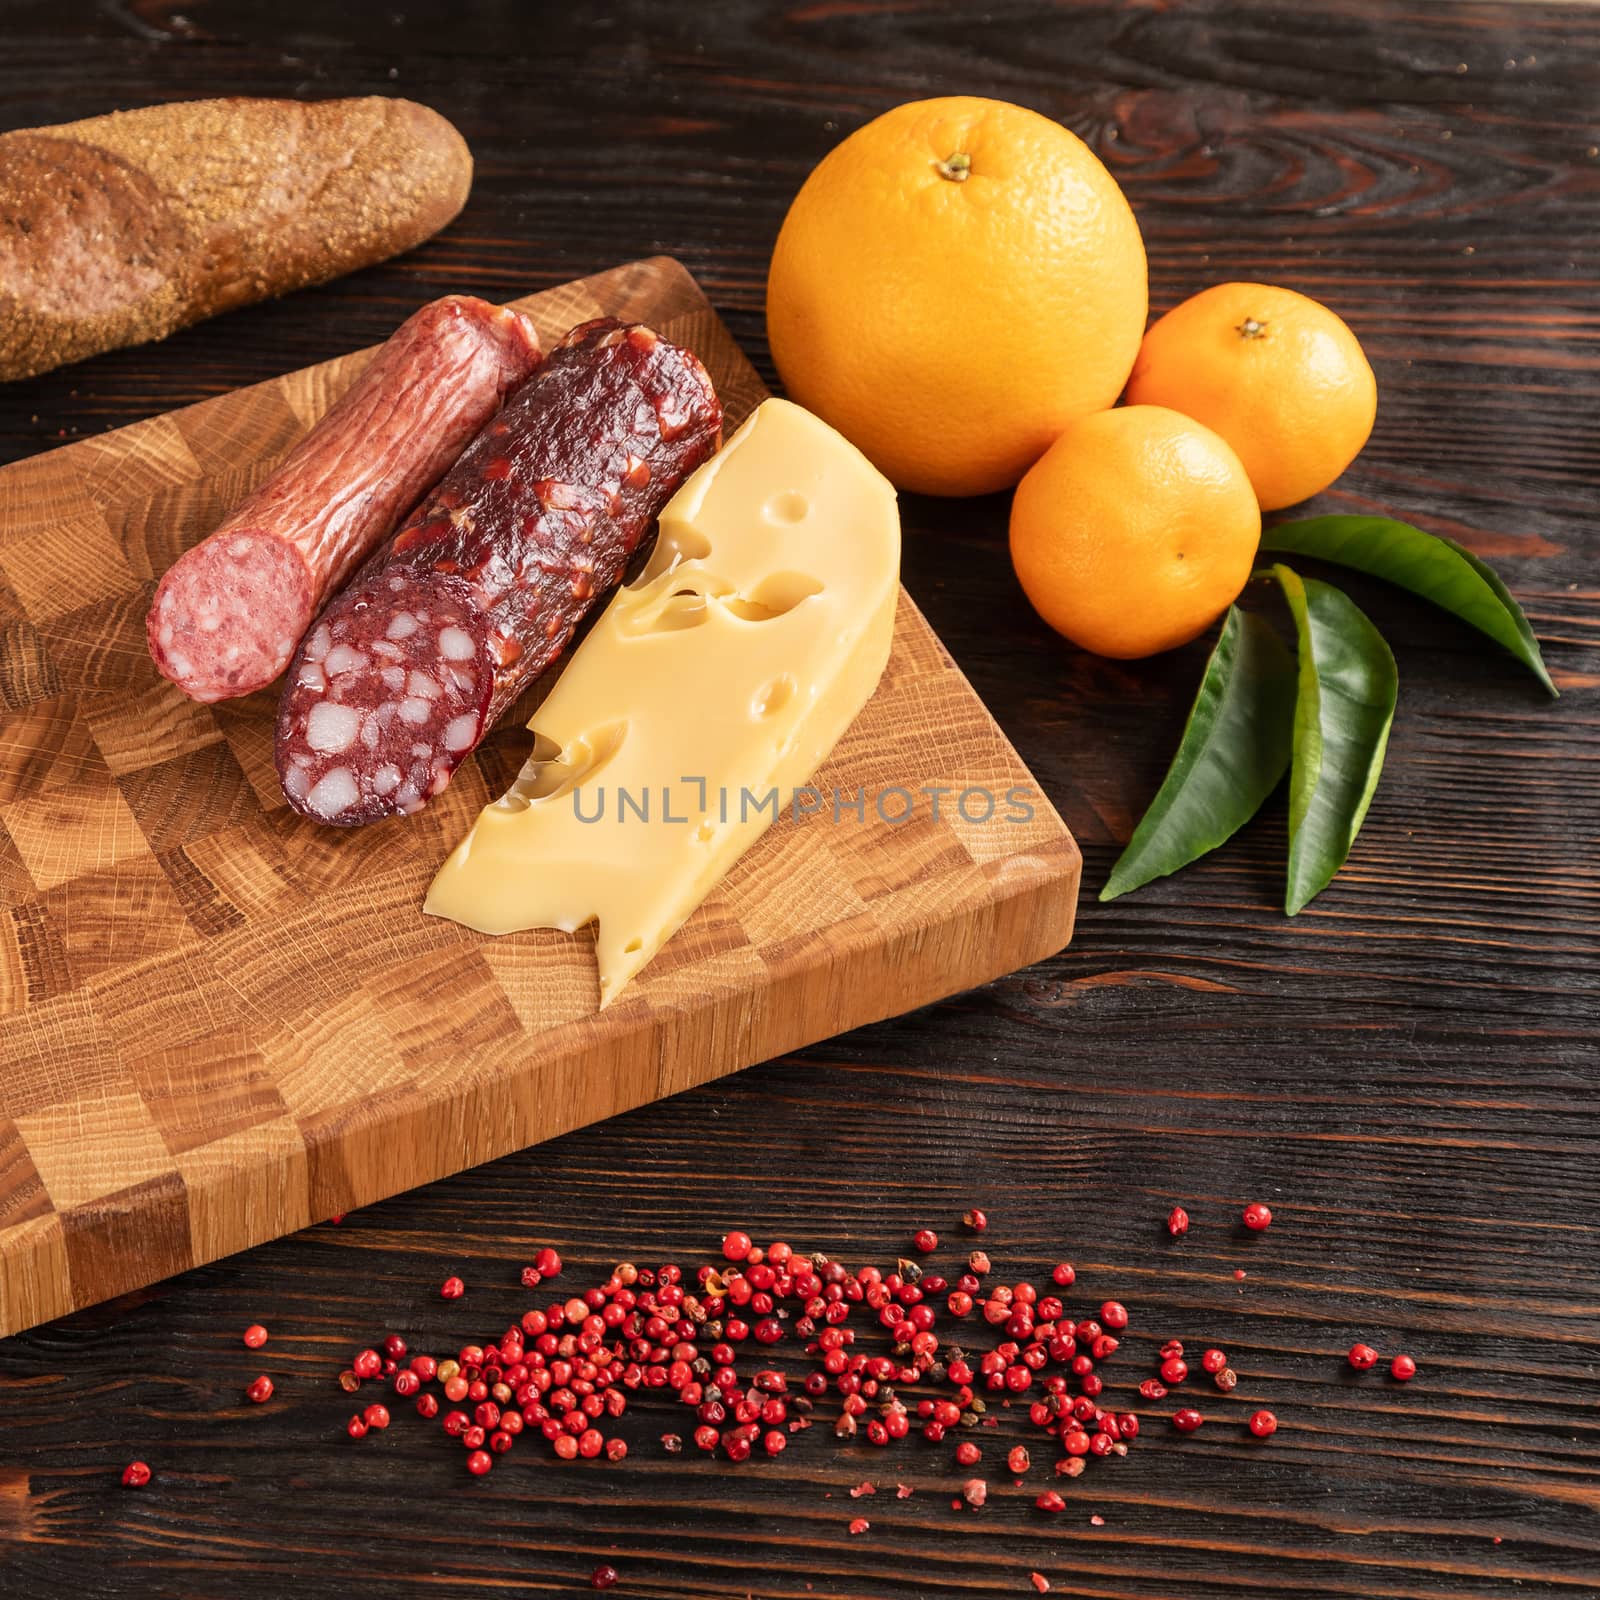 Sausage, cheese and bread on wooden cutting board